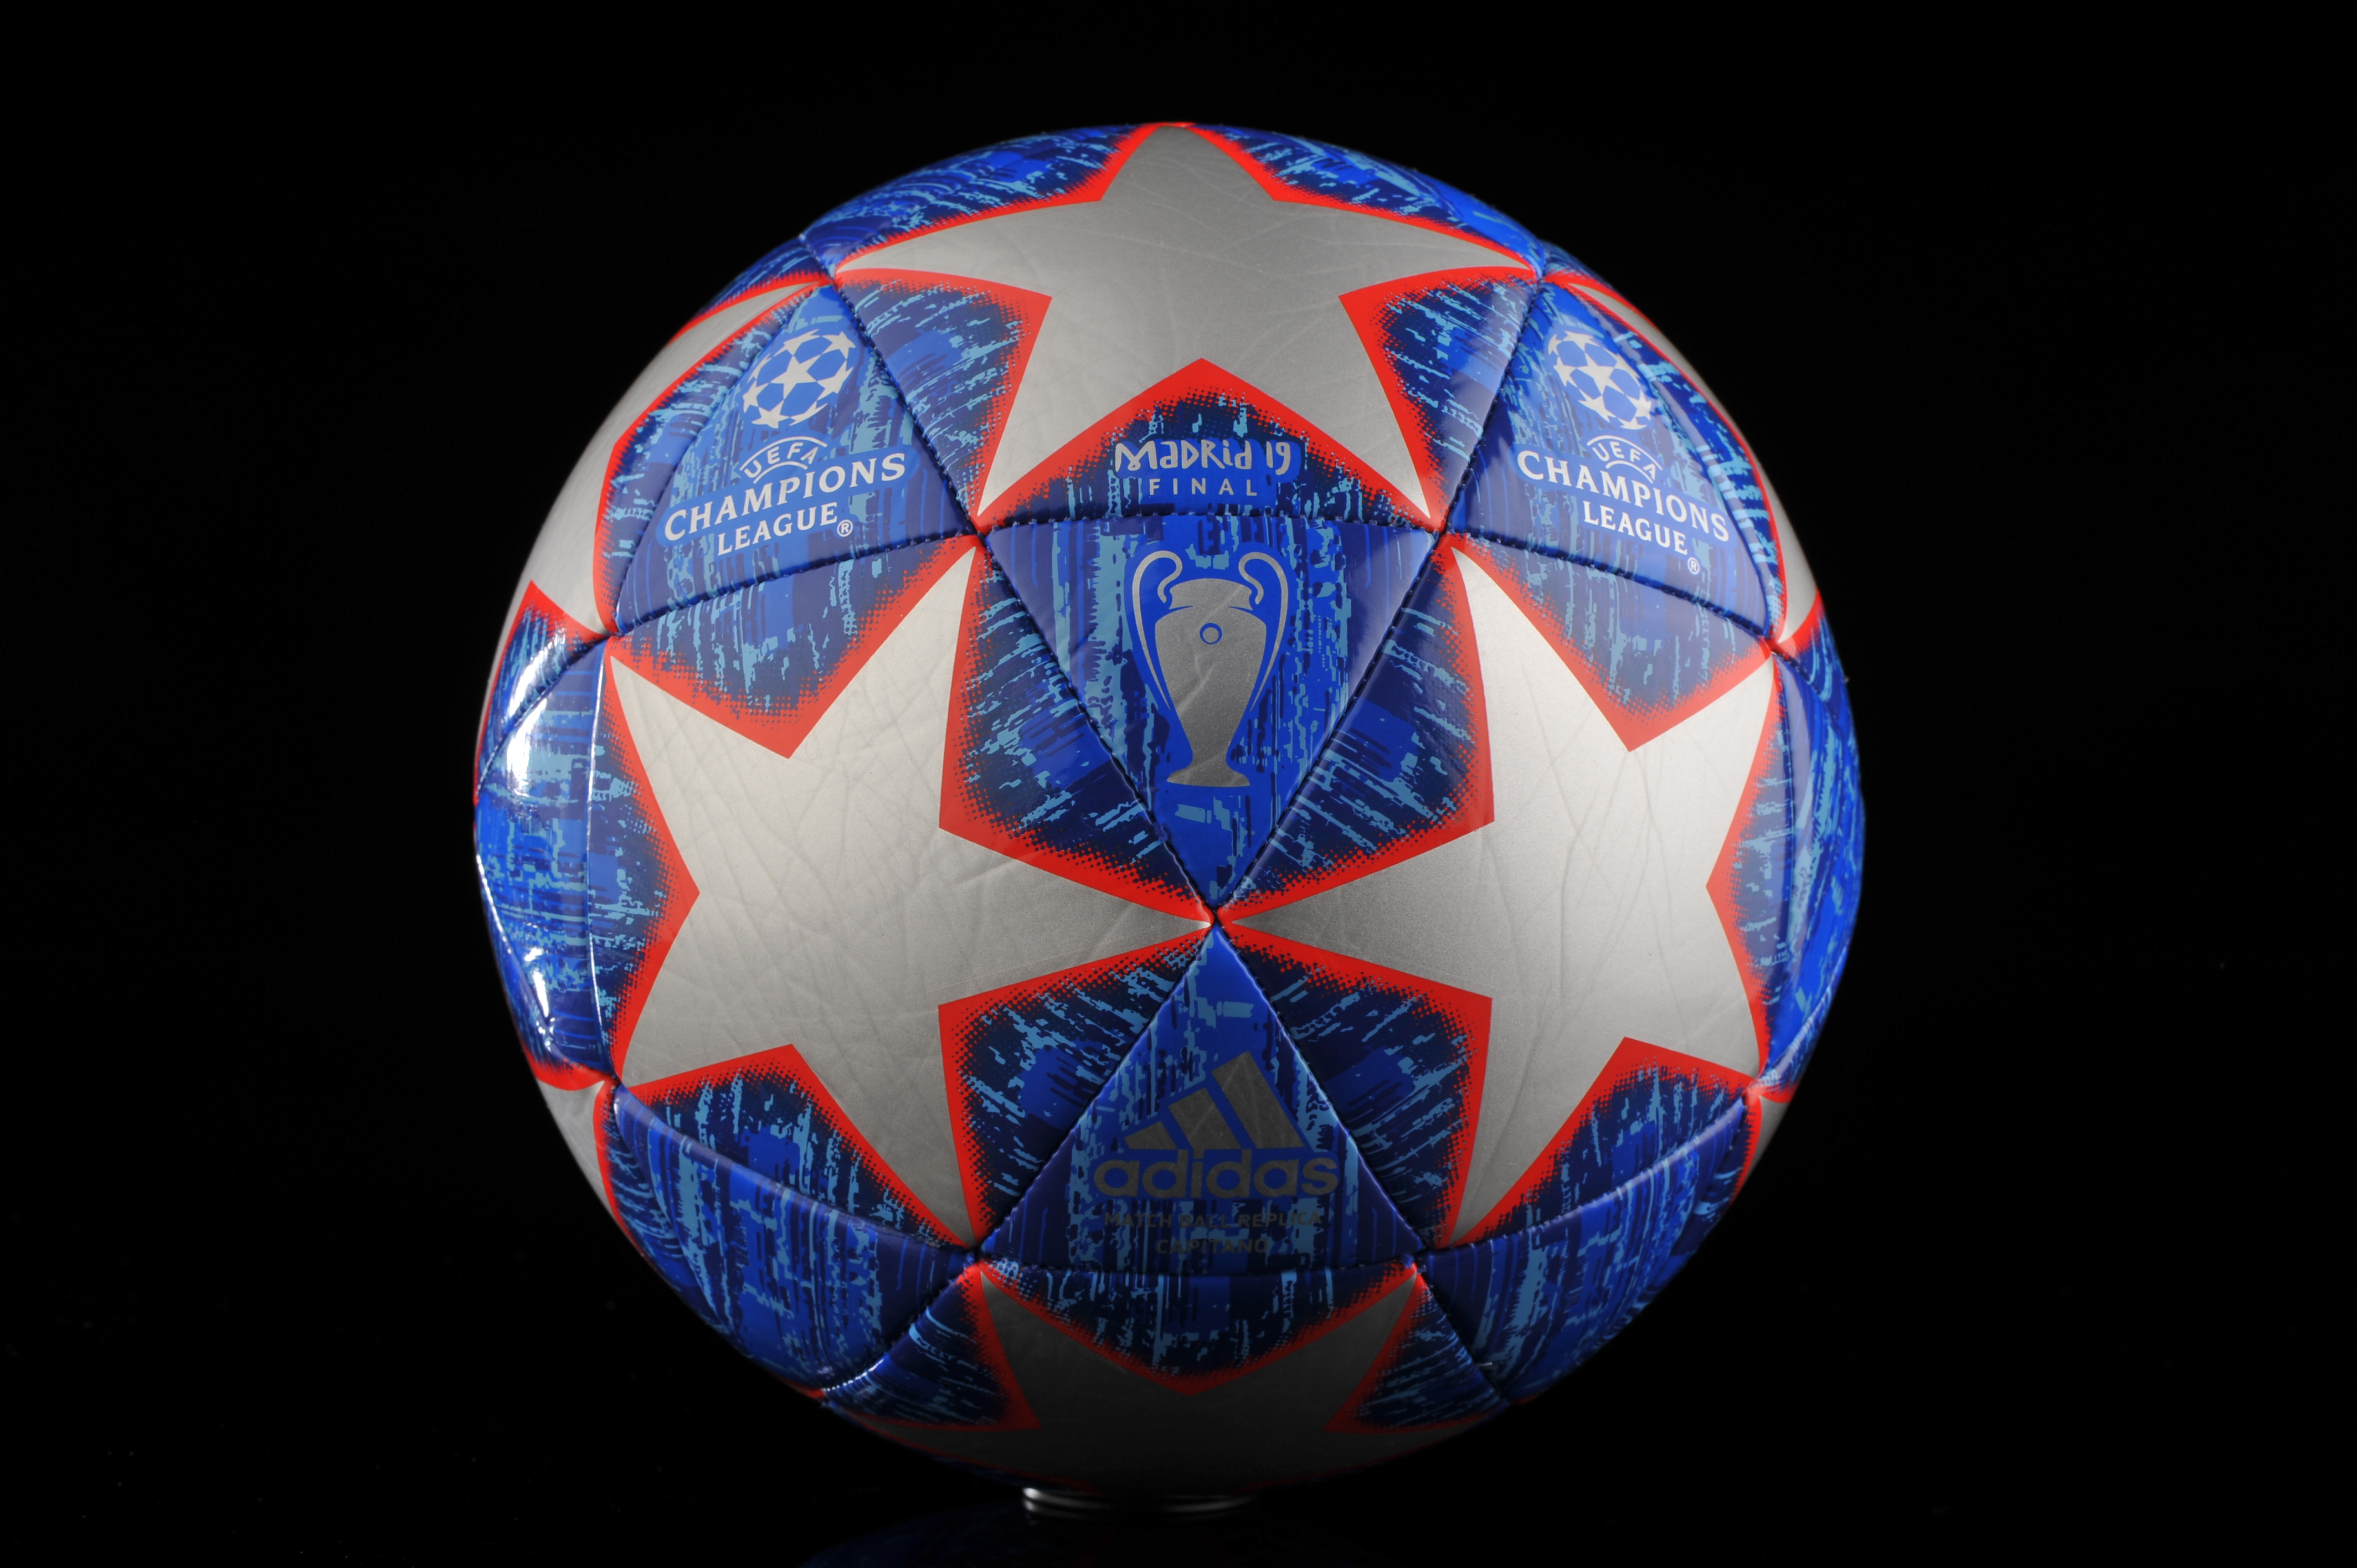 ucl finale madrid capitano ball